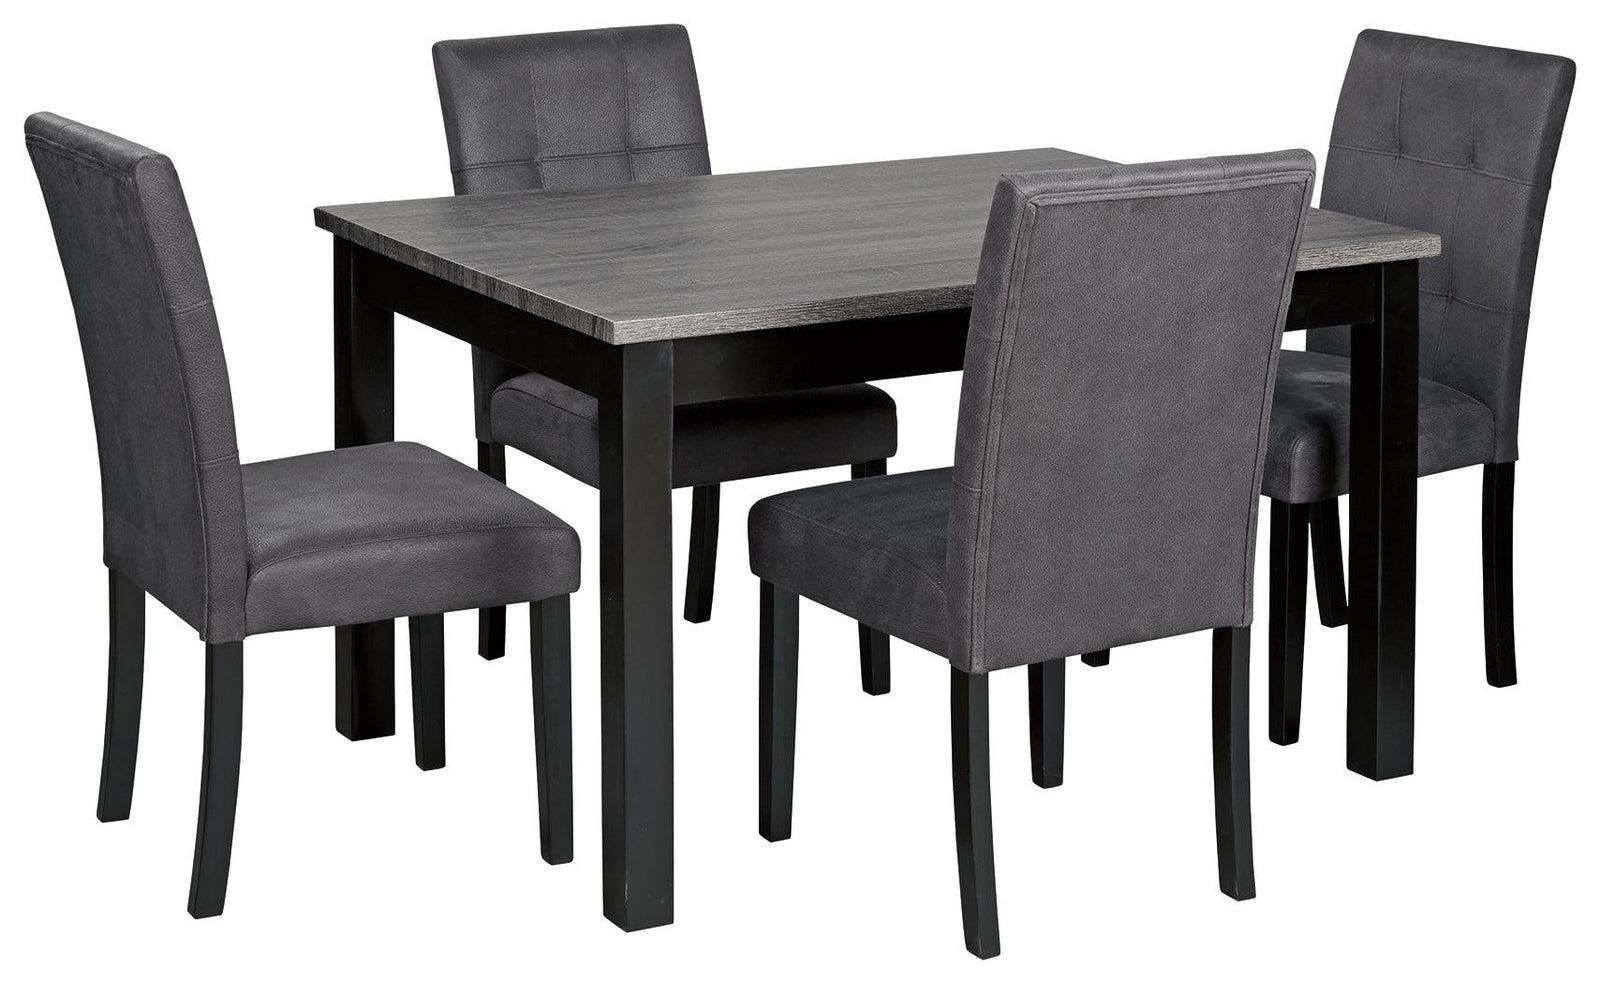 Garvine Two-tone Dining Table And Chairs (Set Of 5) - Ella Furniture